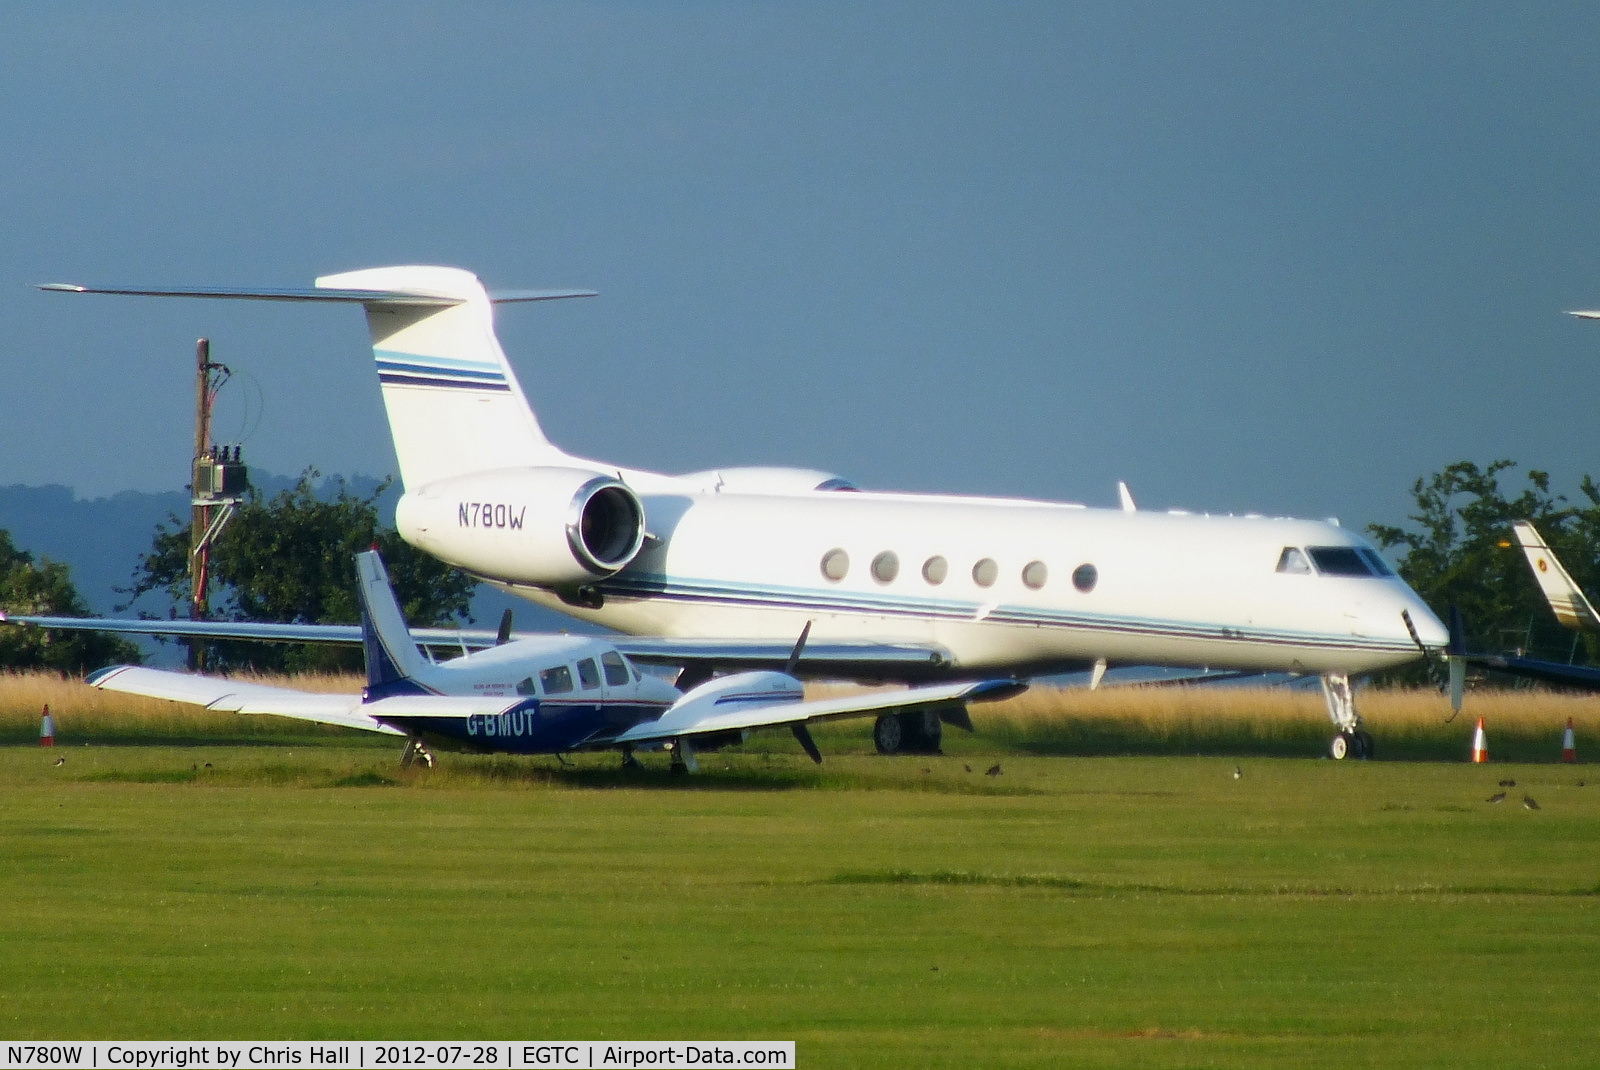 N780W, 1997 Gulfstream Aerospace G-V C/N 530, one of several bizjets parked at Cranfield with visitors for the opening of the London 2012 Olympic games